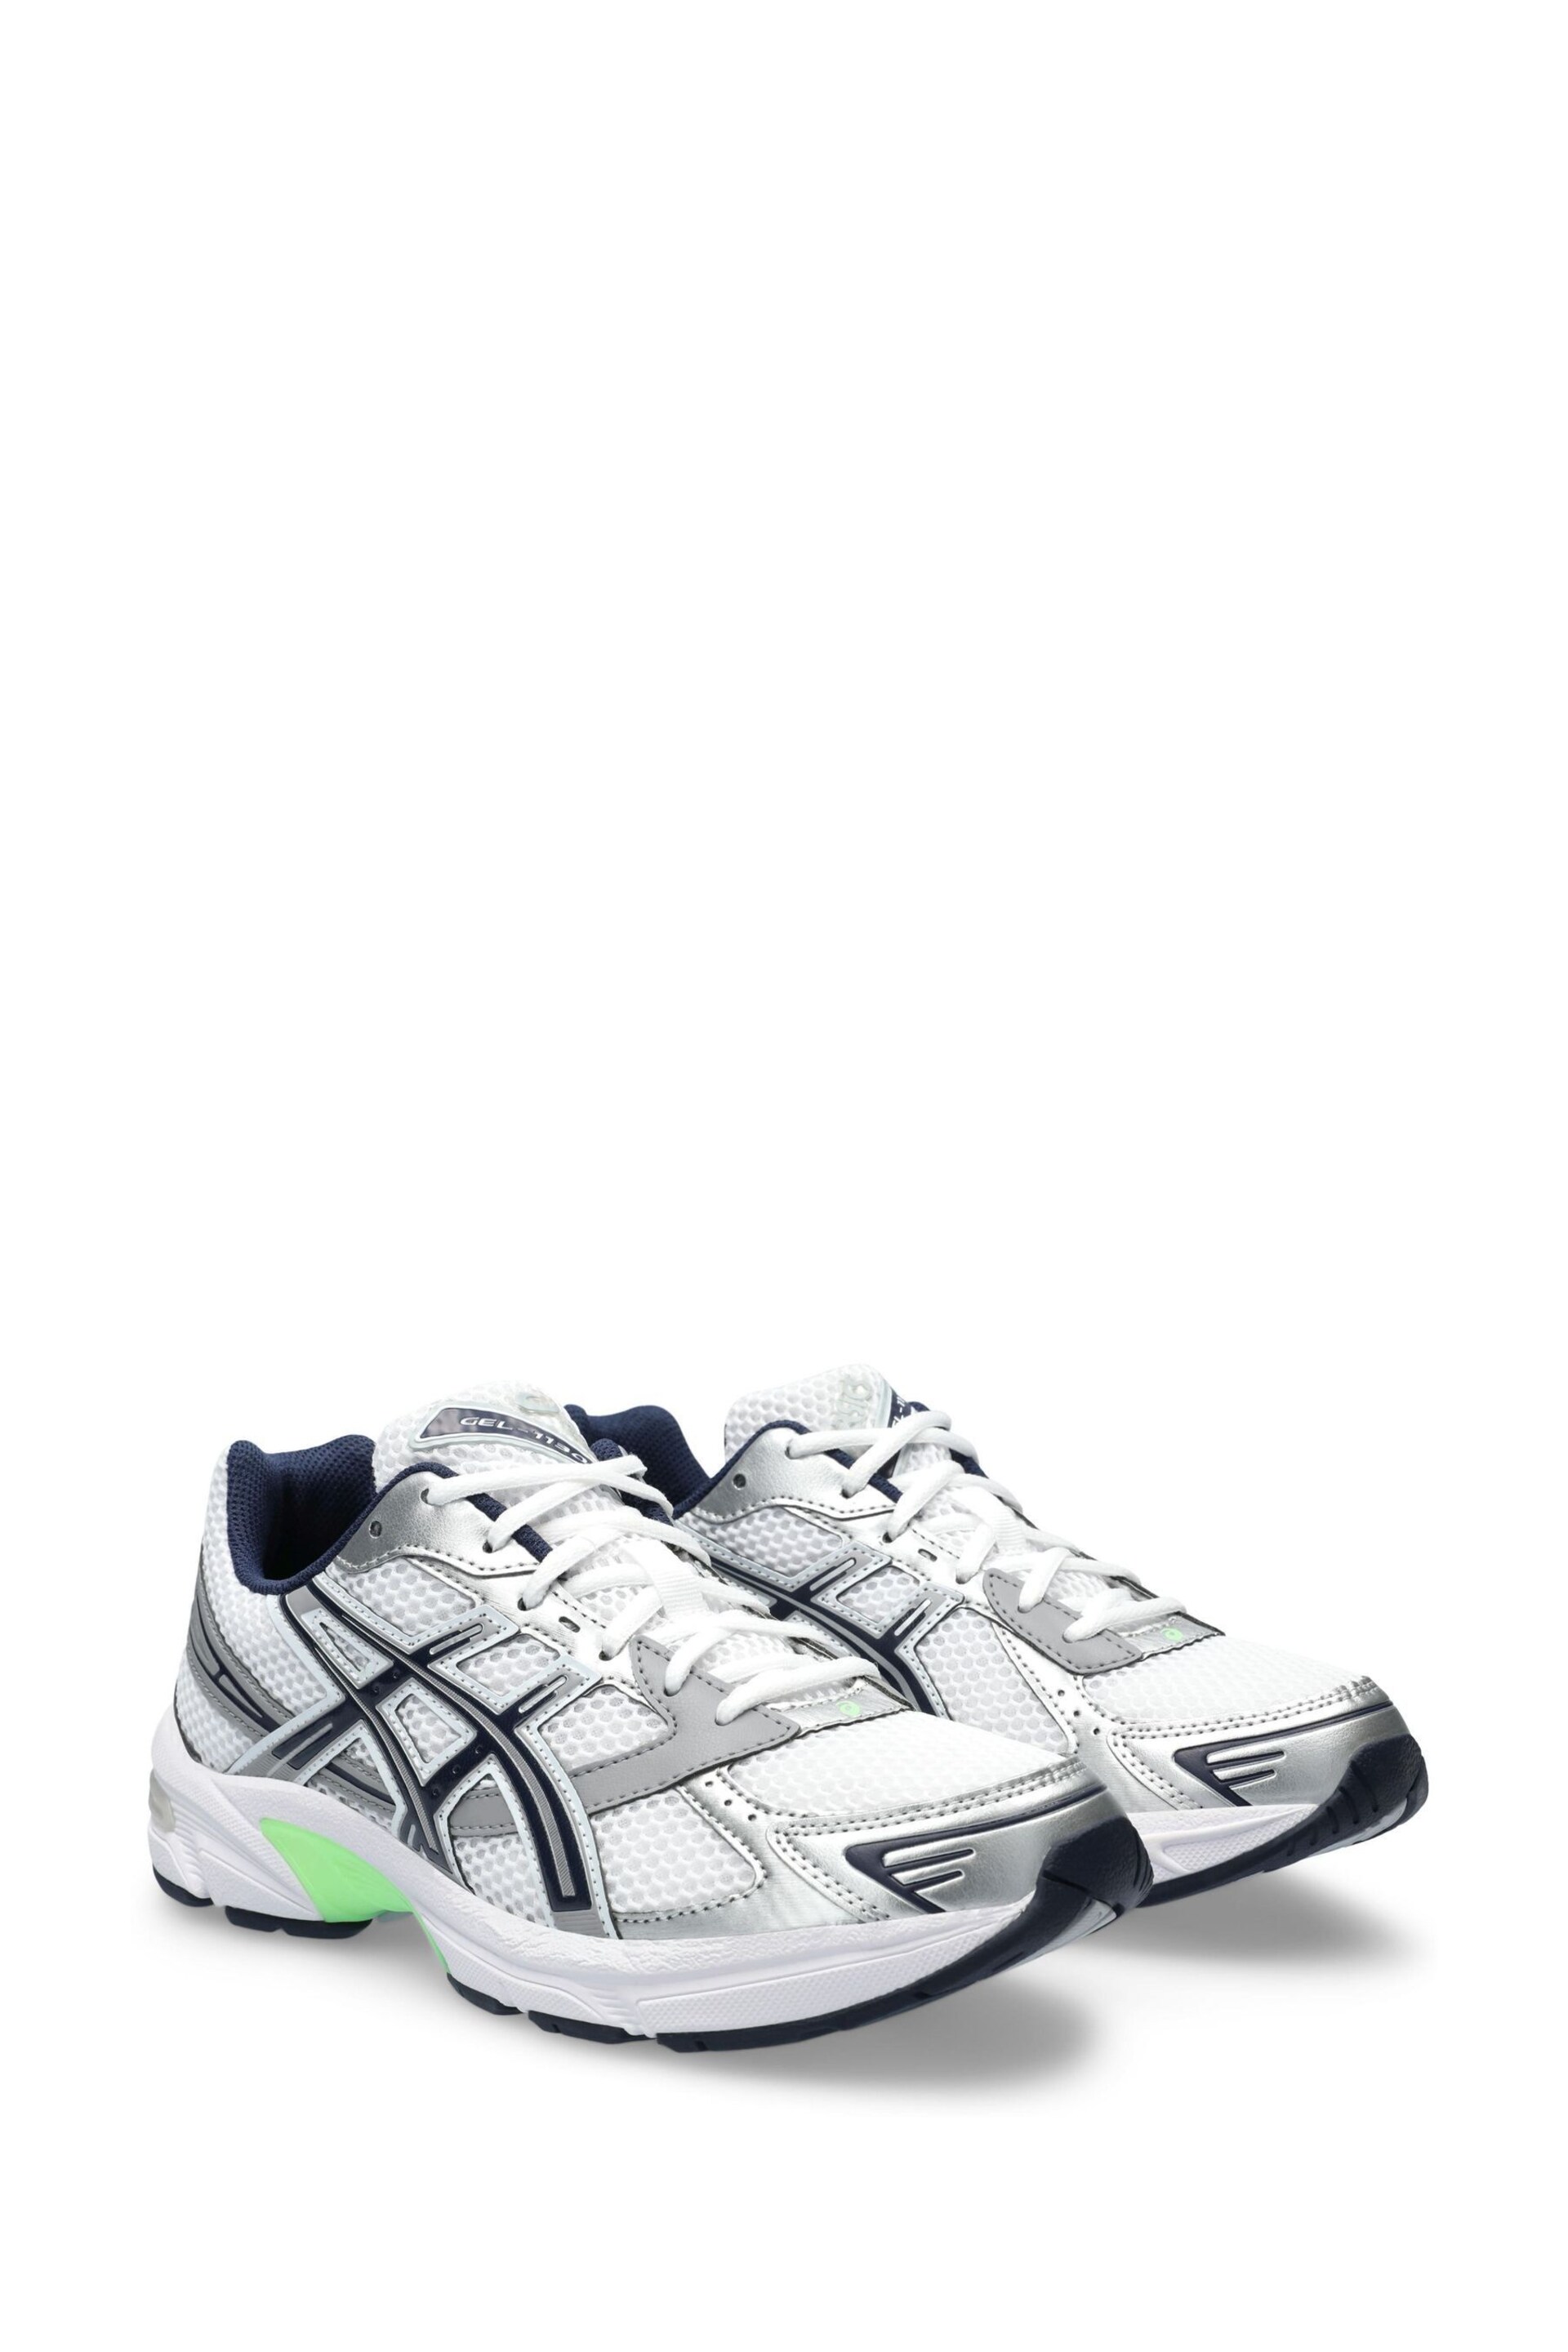 ASICS Womens Gel-1130 Trainers - Image 1 of 7